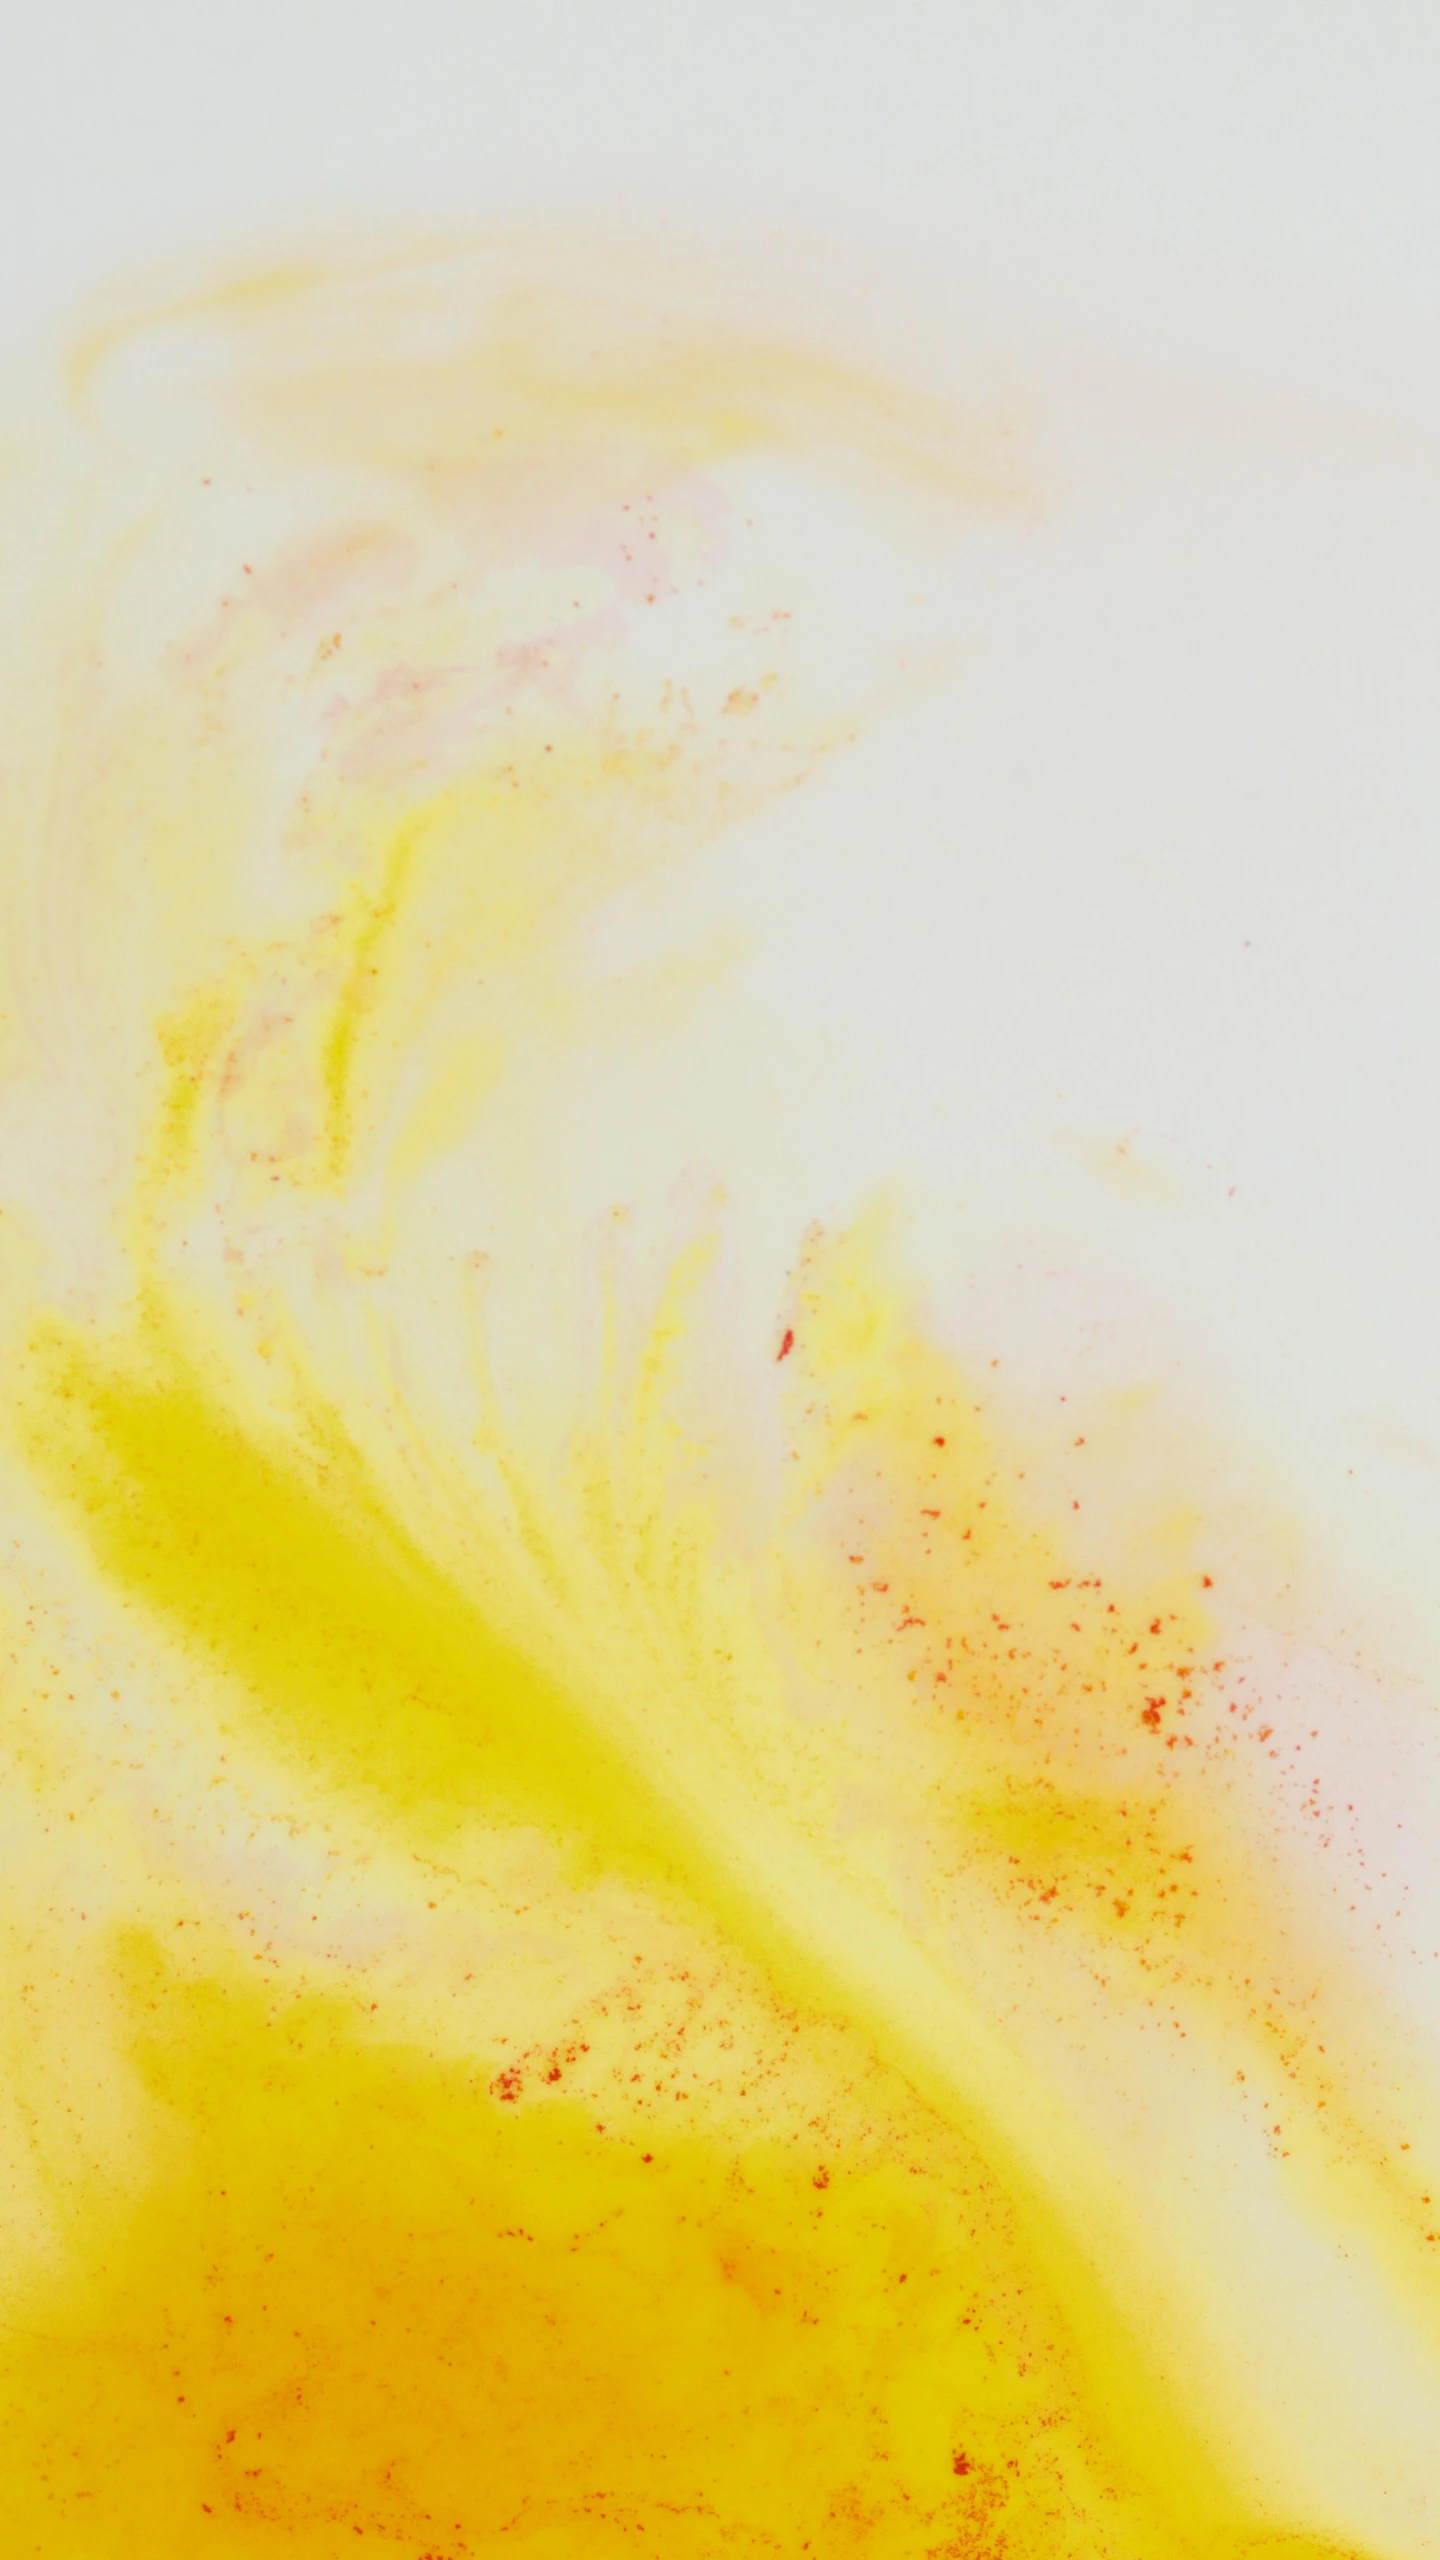 a man riding a surfboard on top of a wave, inspired by Shōzō Shimamoto, flickr, metaphysical painting, white and yellow scheme, sam gilliam, detail, exploding powder